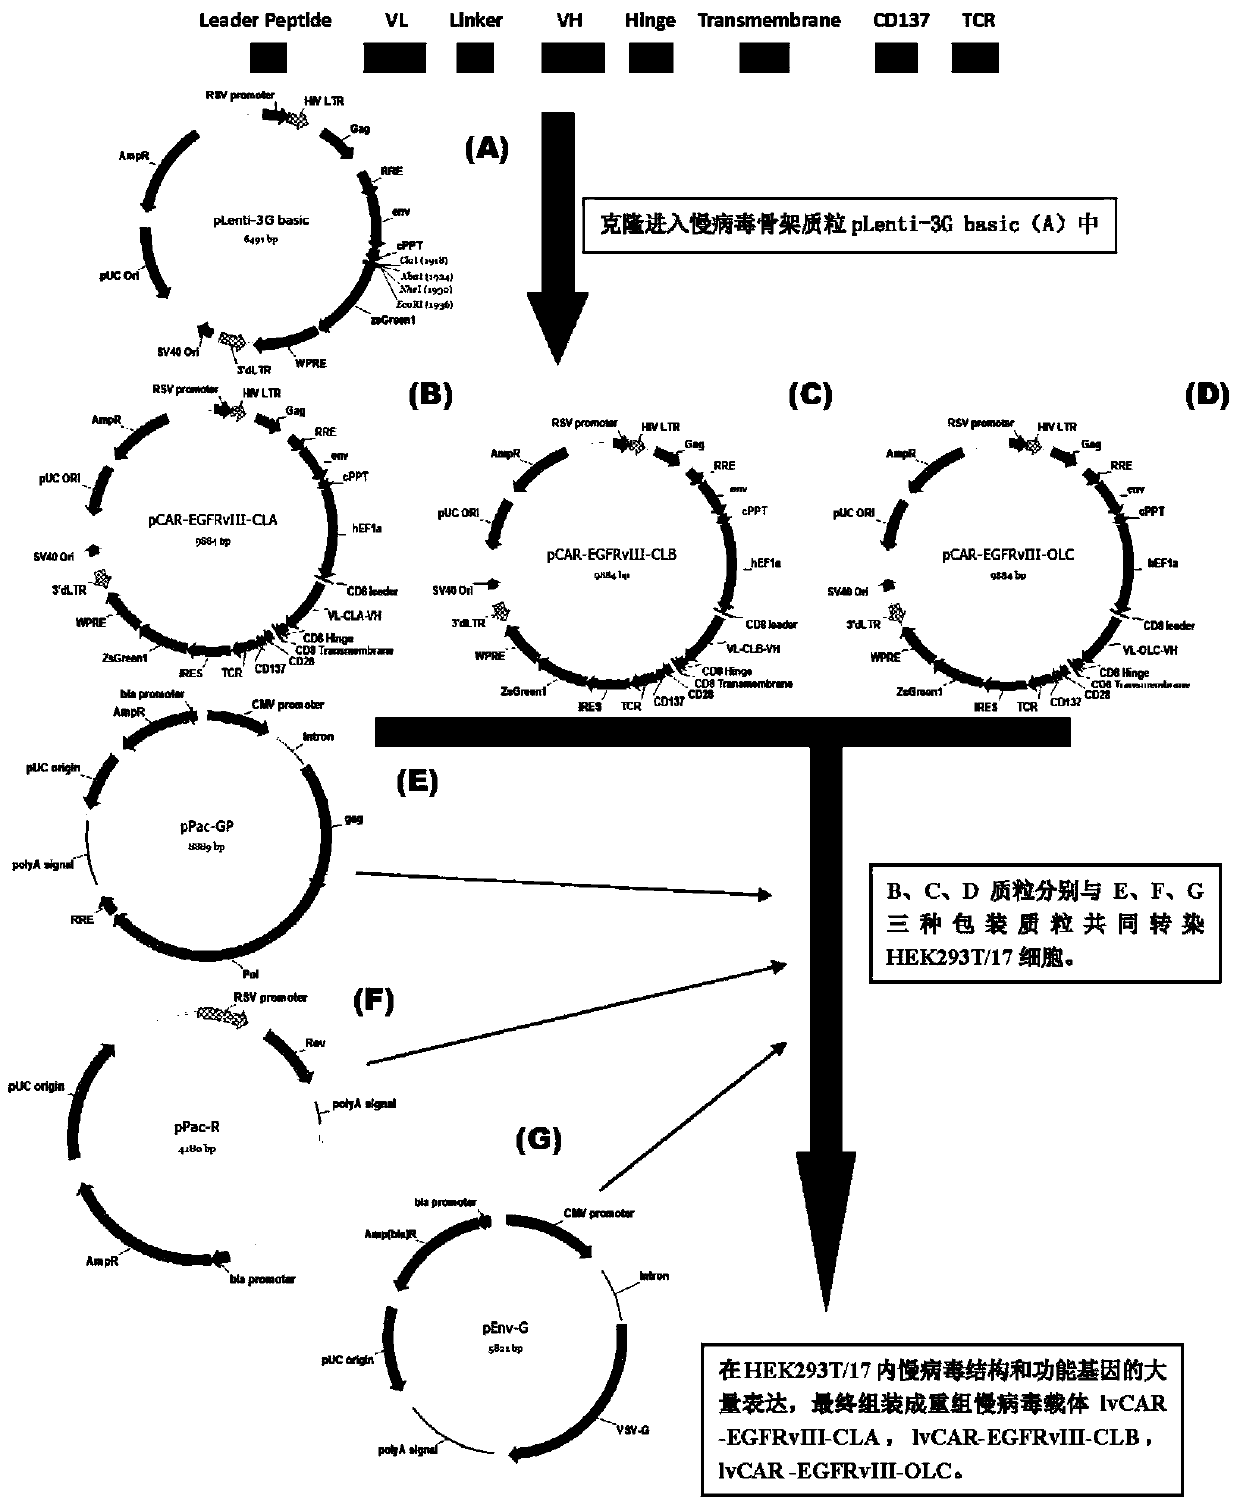 Anti-egfrviii chimeric antigen receptor, coding gene, recombinant expression vector and its construction method and application